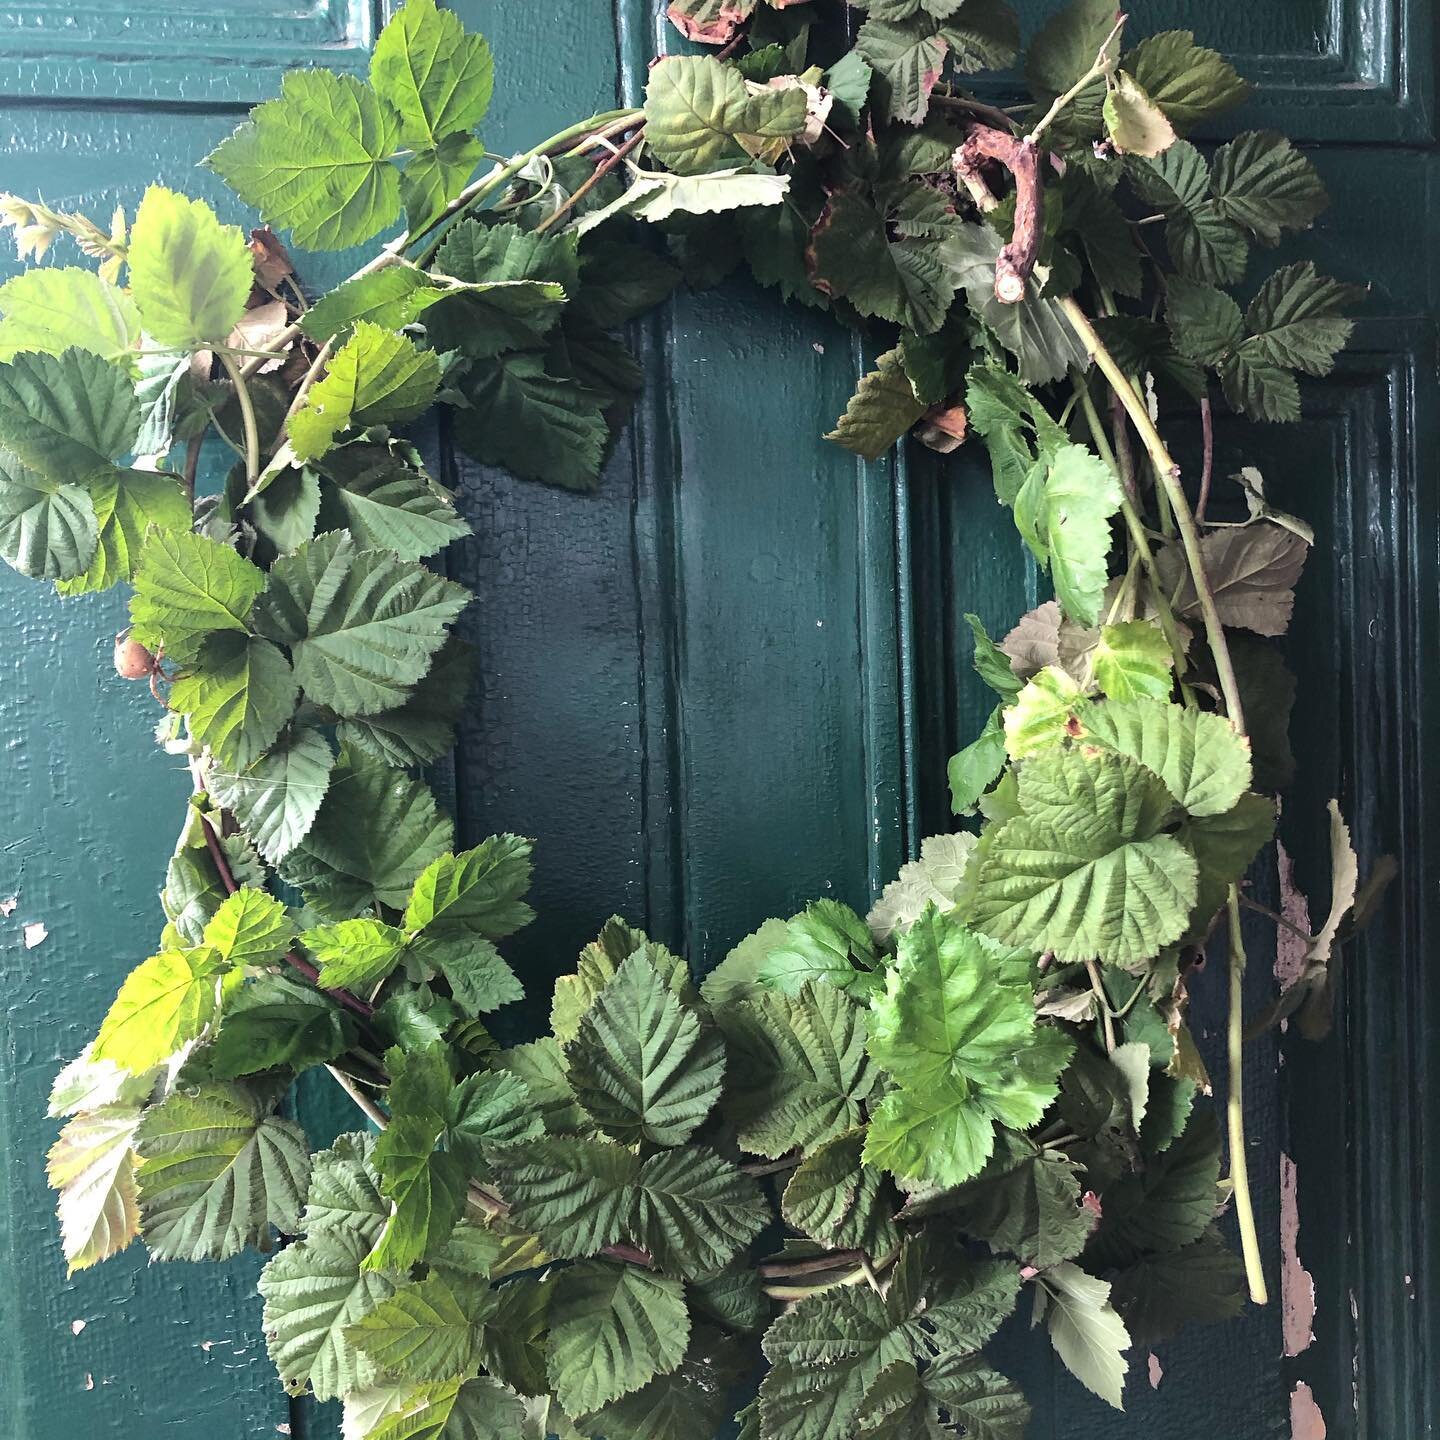 .
.
Raspberry vine taming this afternoon. Prunings were begging to woven into a quick, loose, wild wreath. Bonus accidental wildlife included.
.
.
Beautiful huge garden orb weaver now living on my front door. Sorry for moving you lovely one.
.
.
Even